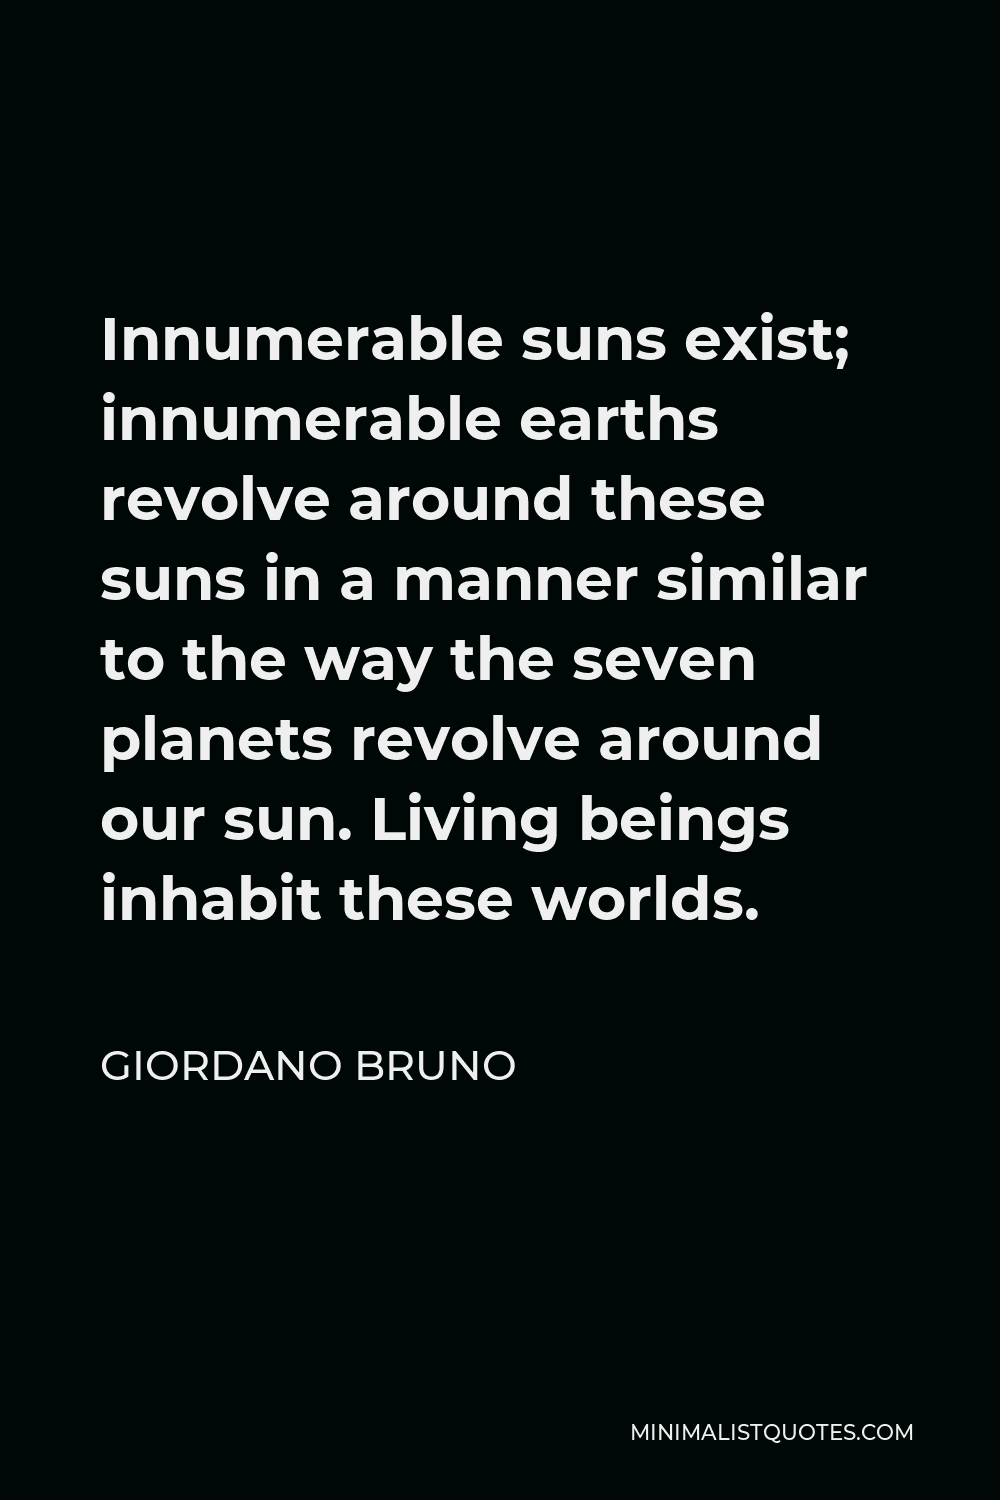 Giordano Bruno Quote - Innumerable suns exist; innumerable earths revolve around these suns in a manner similar to the way the seven planets revolve around our sun. Living beings inhabit these worlds.